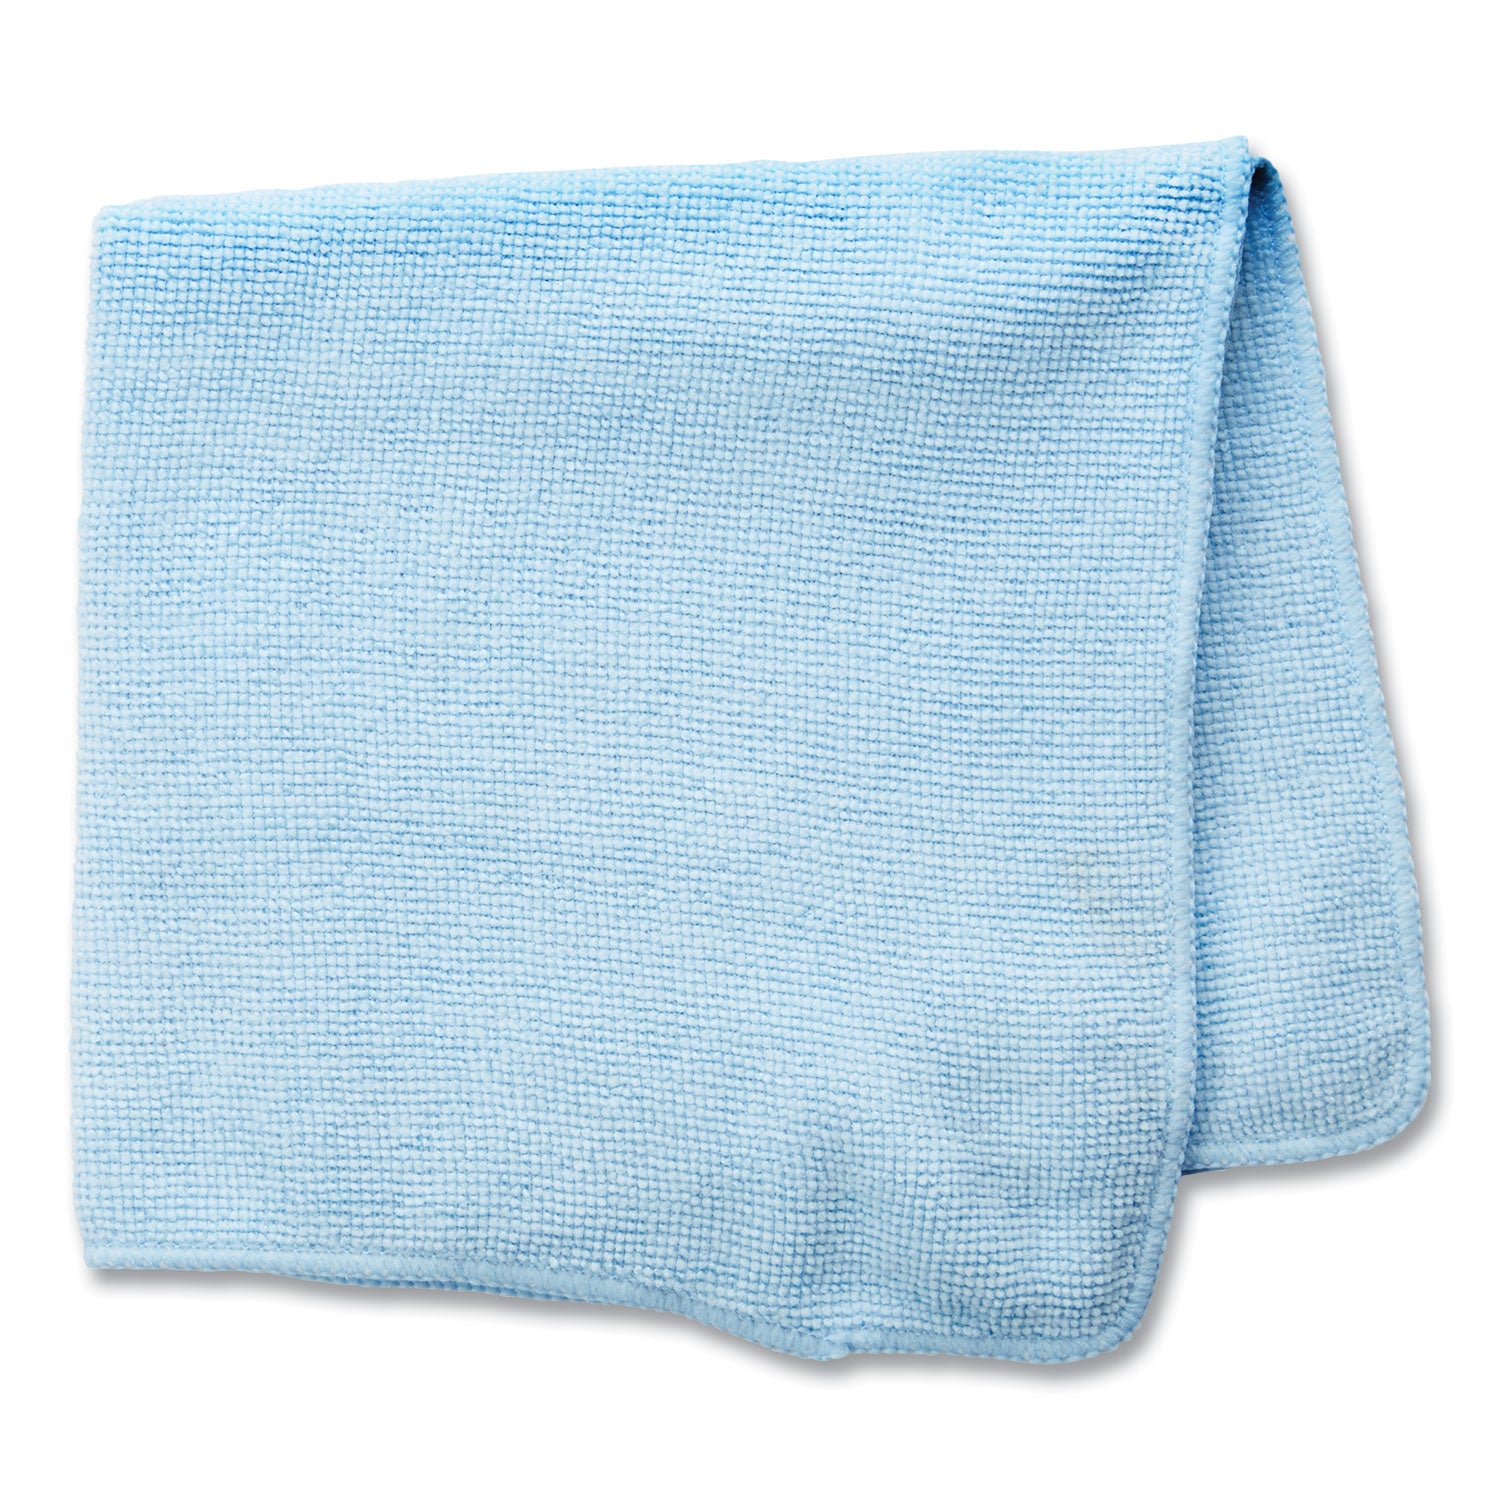 Microfiber Cleaning Cloths, 12 x 12, Blue, 24/Pack - 